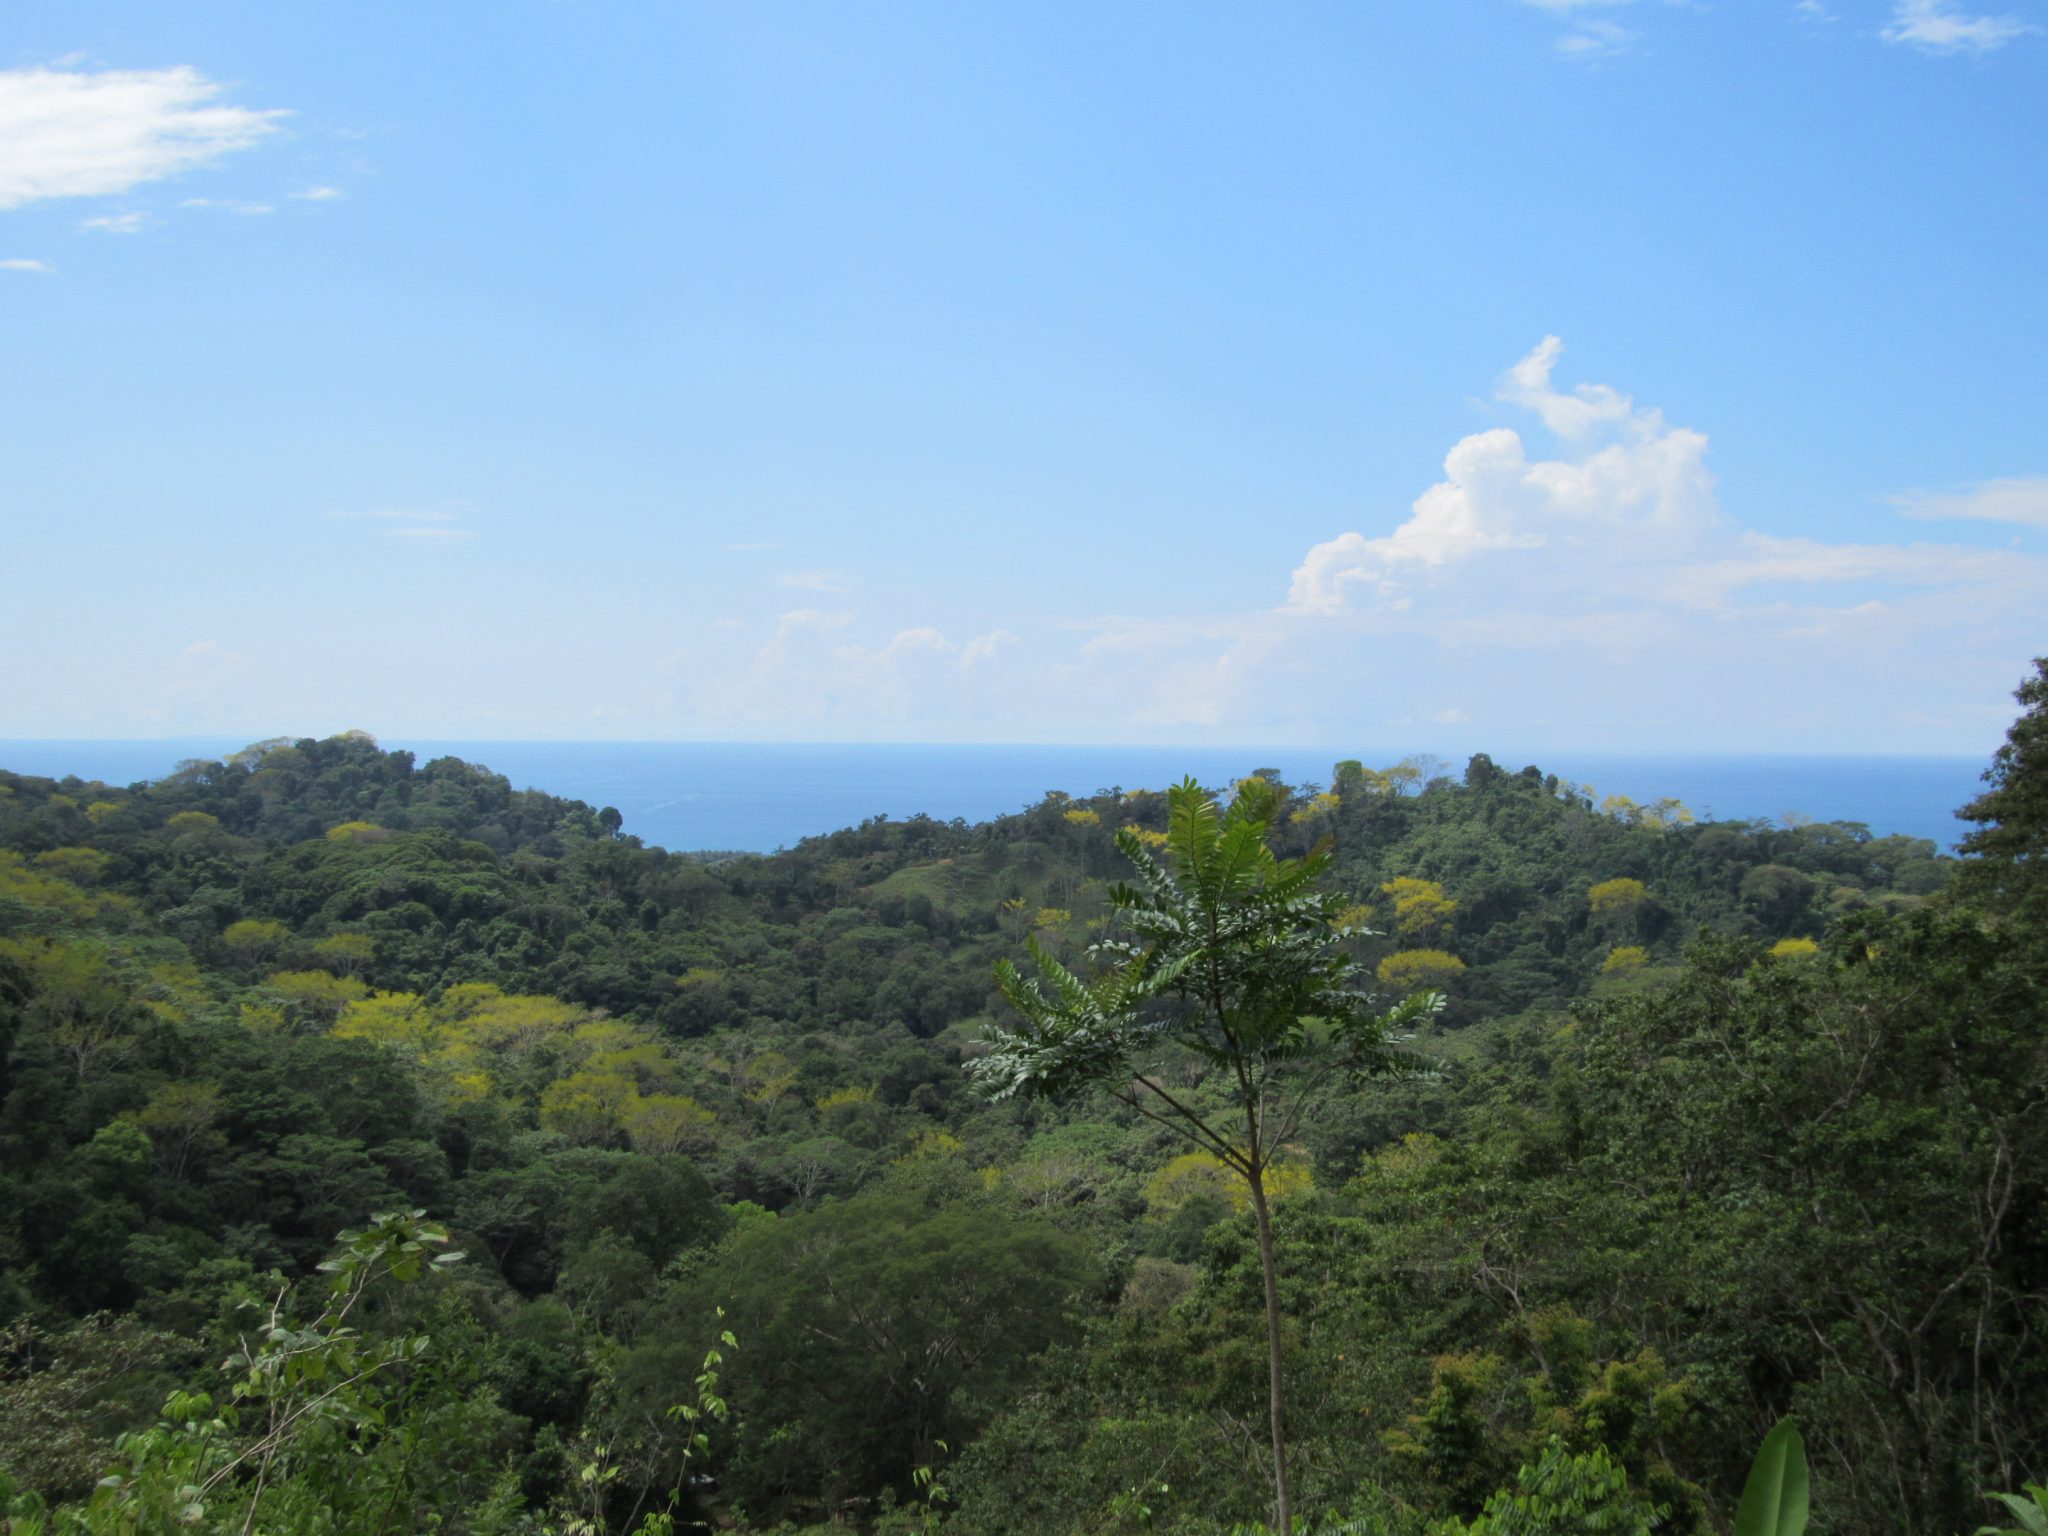 3.9 ACRES - Beautiful Ocean View Property With Multiple Building Sites And Easy Access To Rivers!!!